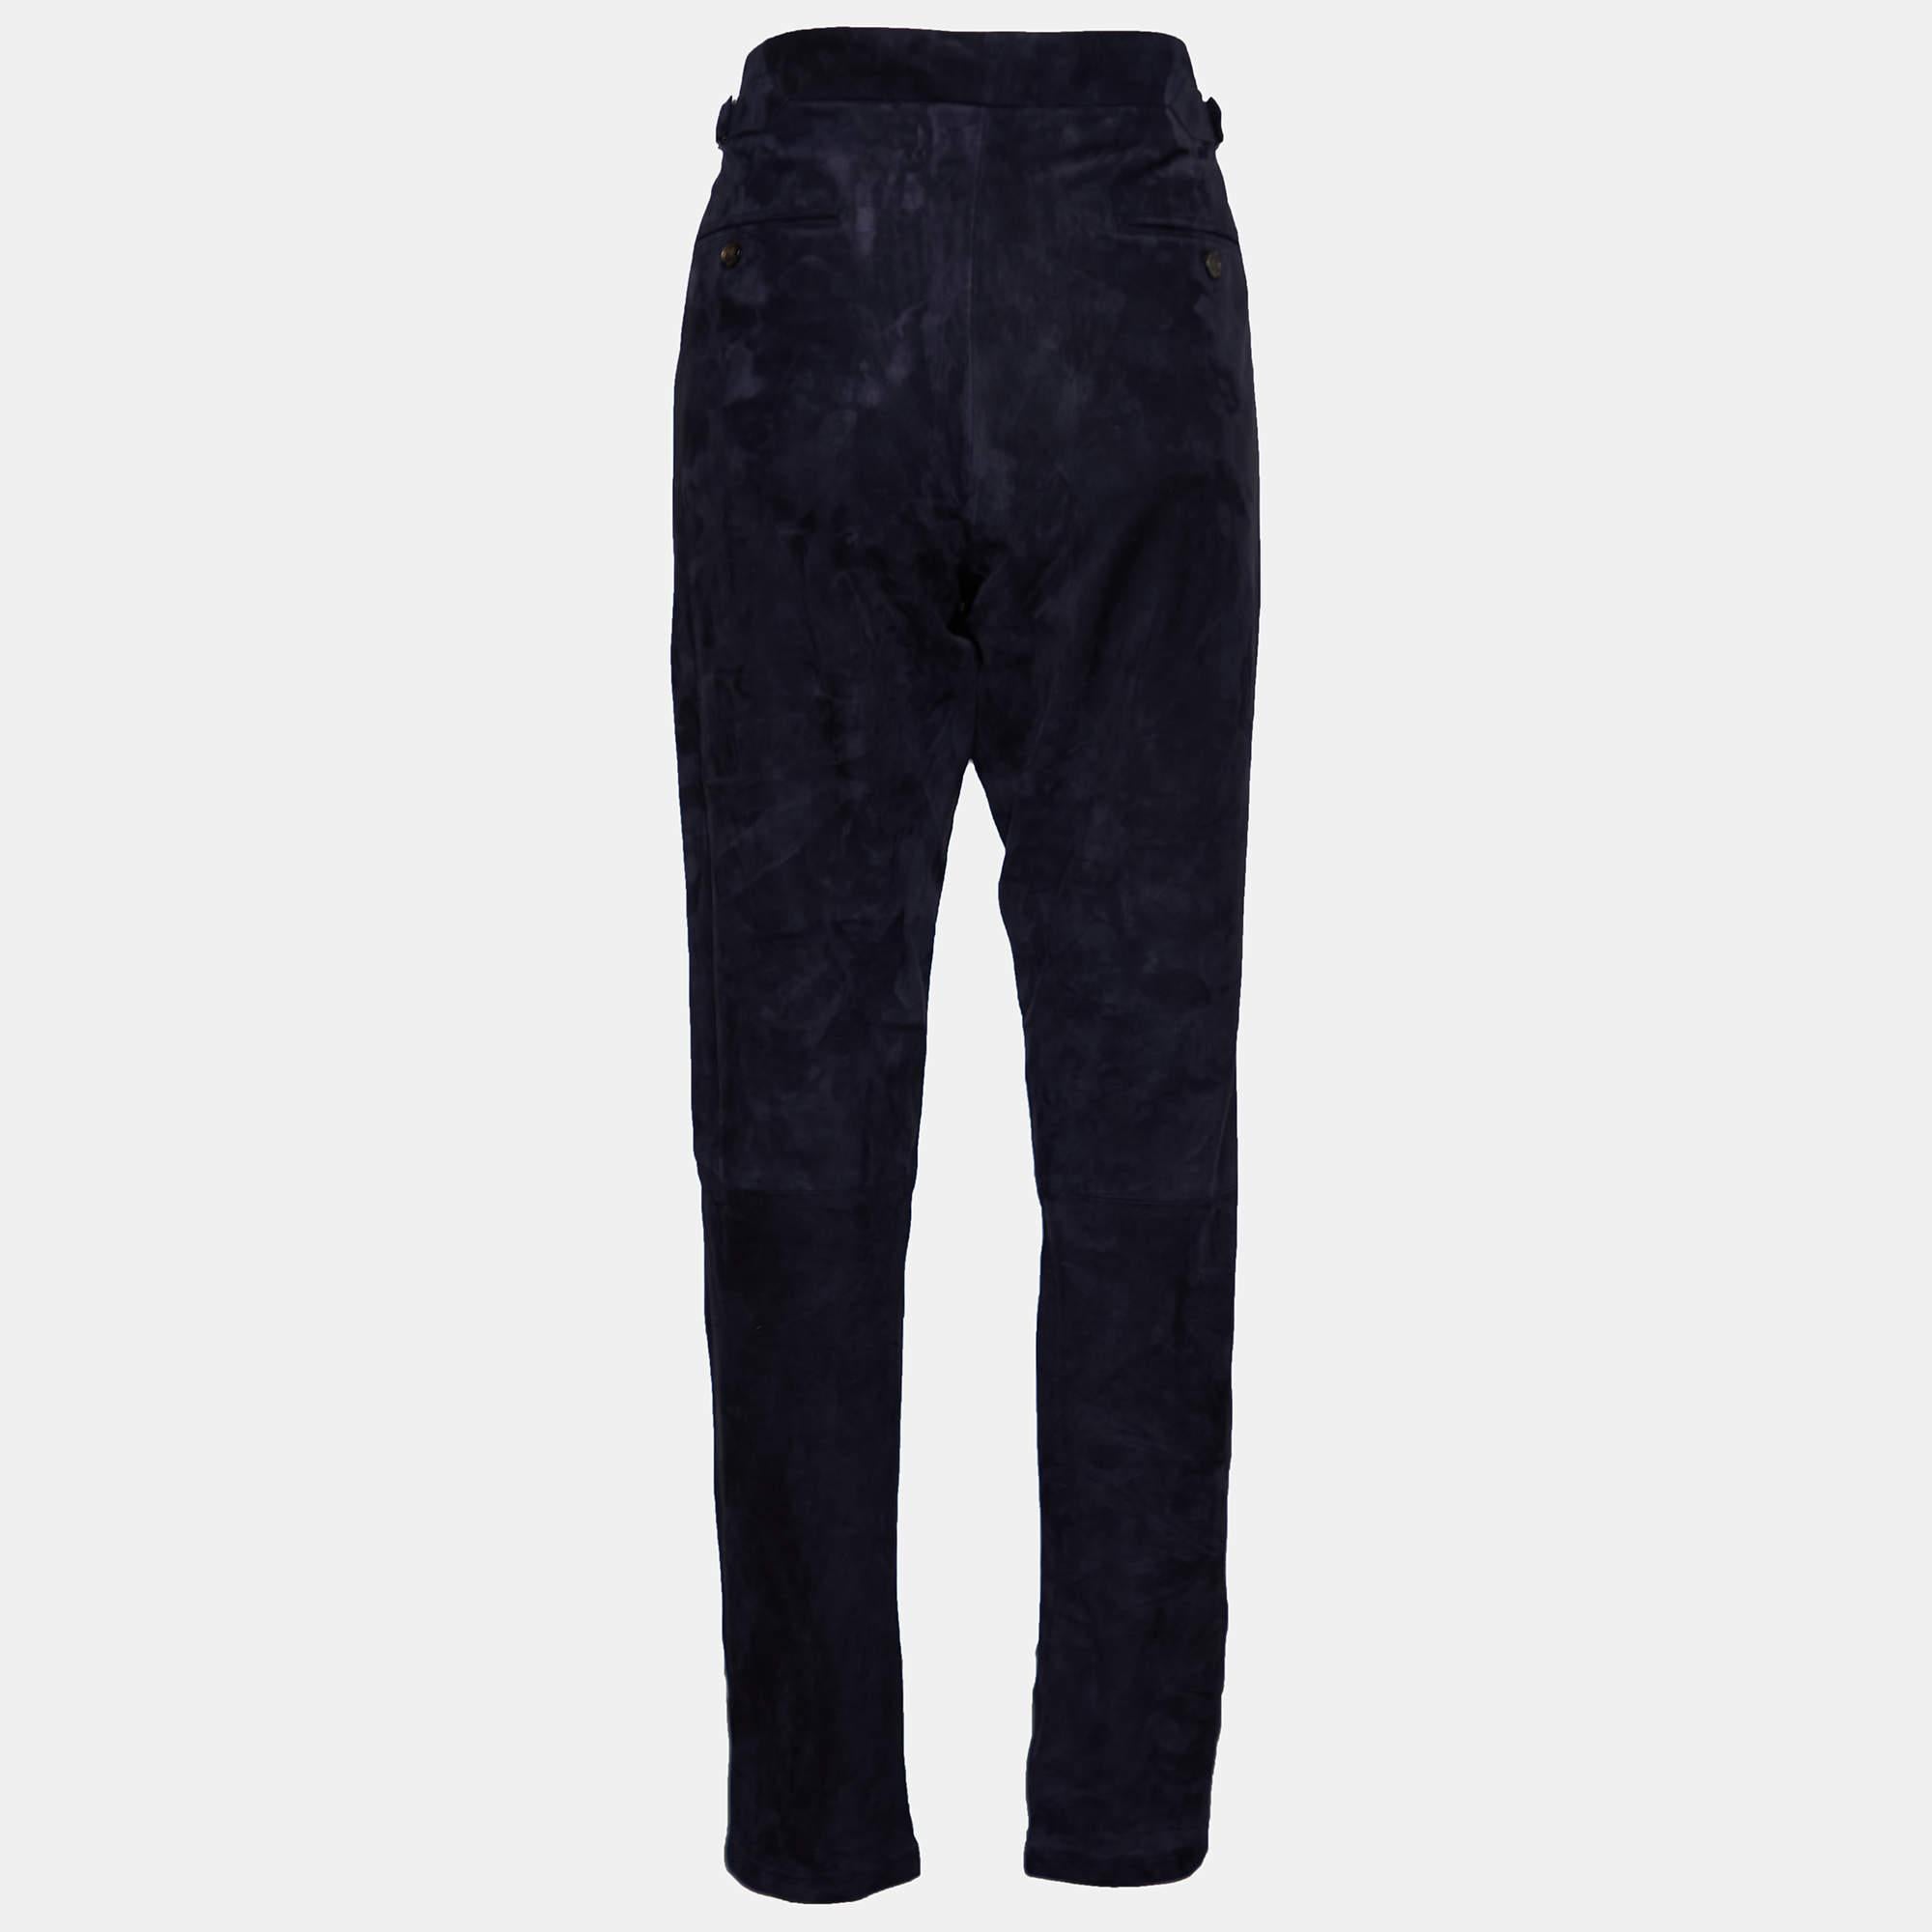 Impeccably tailored pants are a staple in a well-curated wardrobe. These designer pants from Ralph Lauren Purple Label are finely sewn using navy blue suede to give you the desired look and all-day comfort.

Includes: Price Tag
